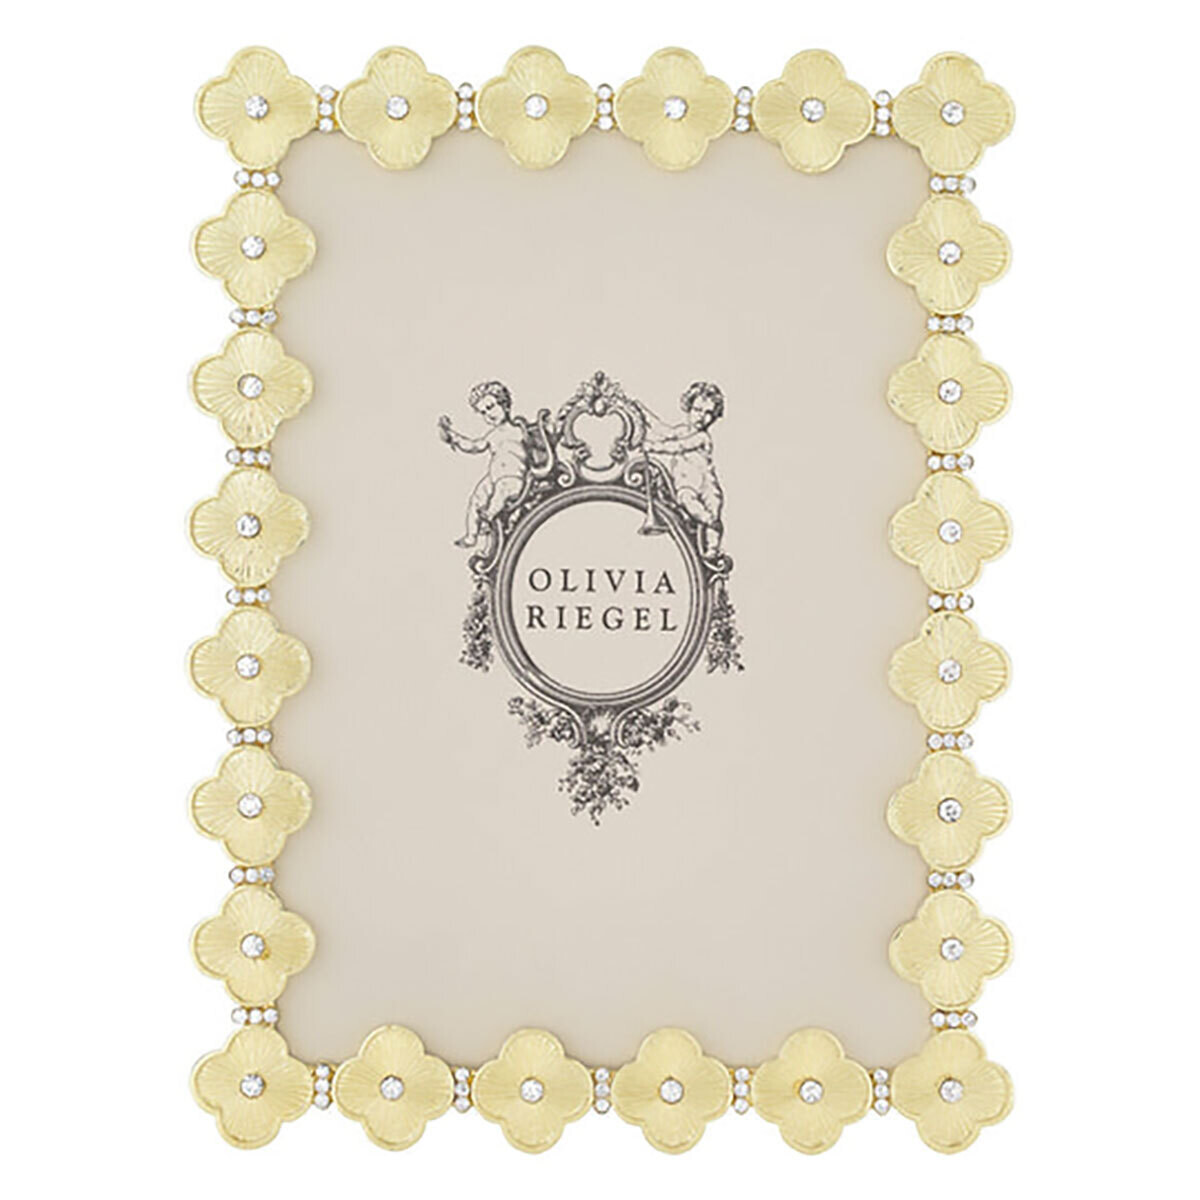 Olivia Riegel Gold Clover 4" x 6" Picture Frame RT2252